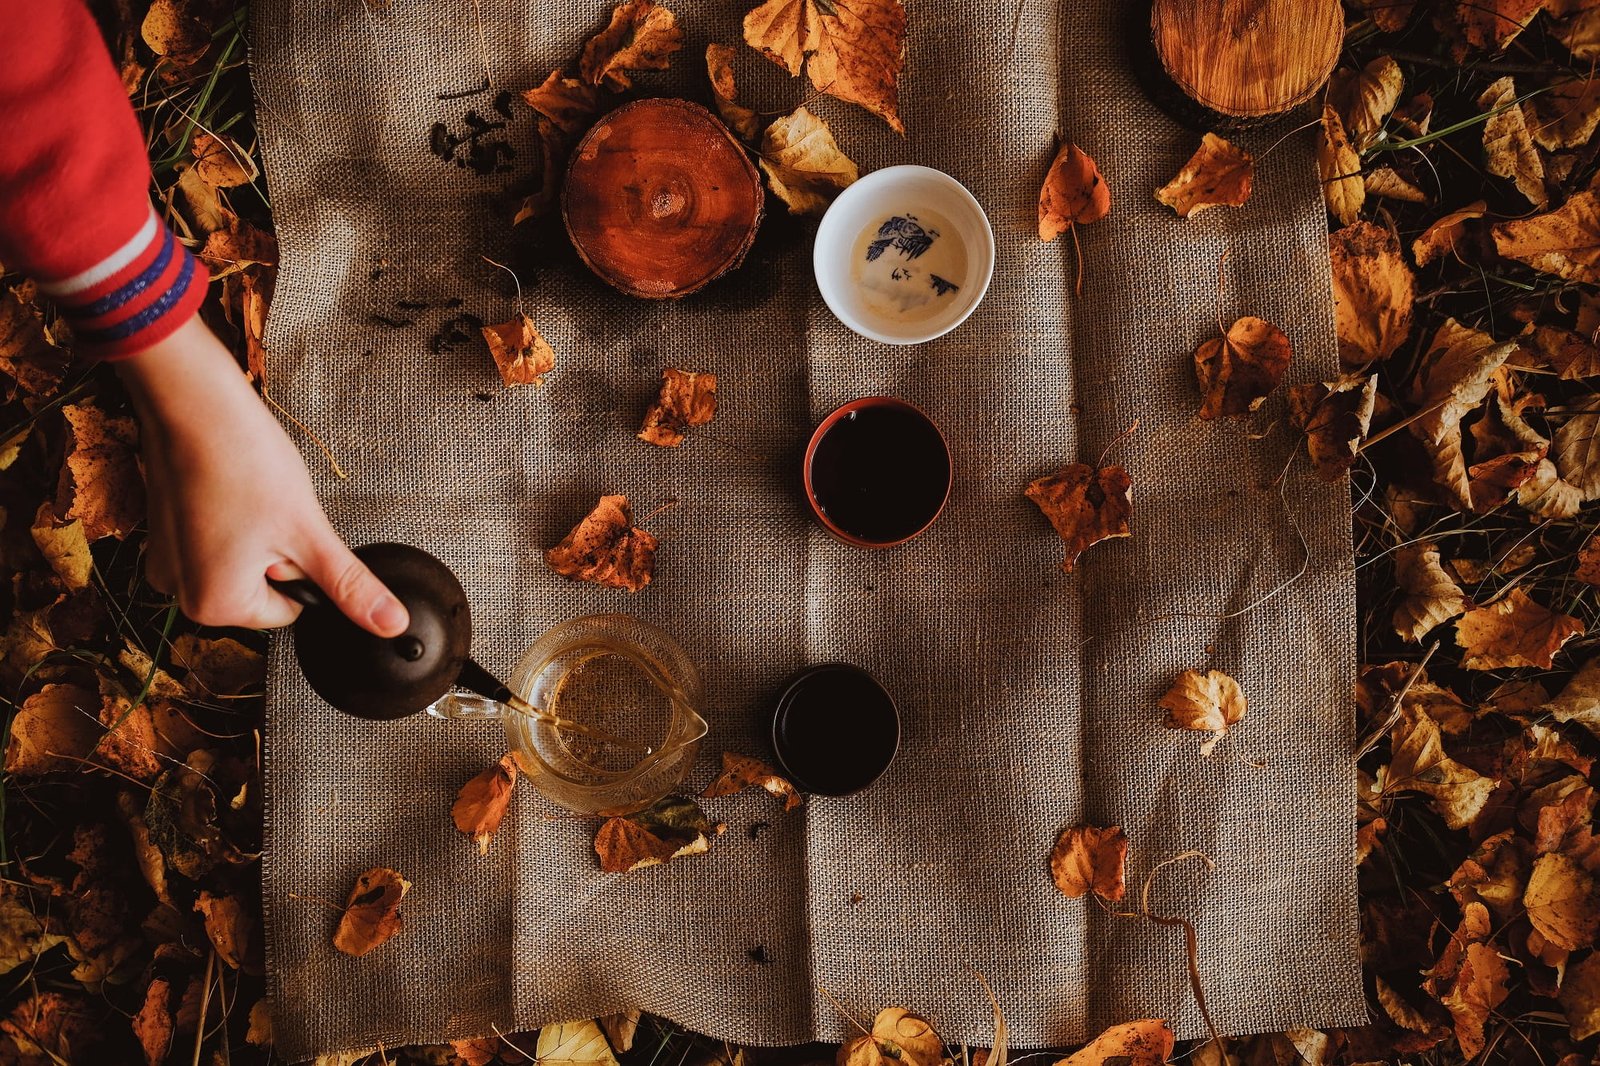 Autumn scene with fallen leaves and a person pouring tea from a teapot into a cup